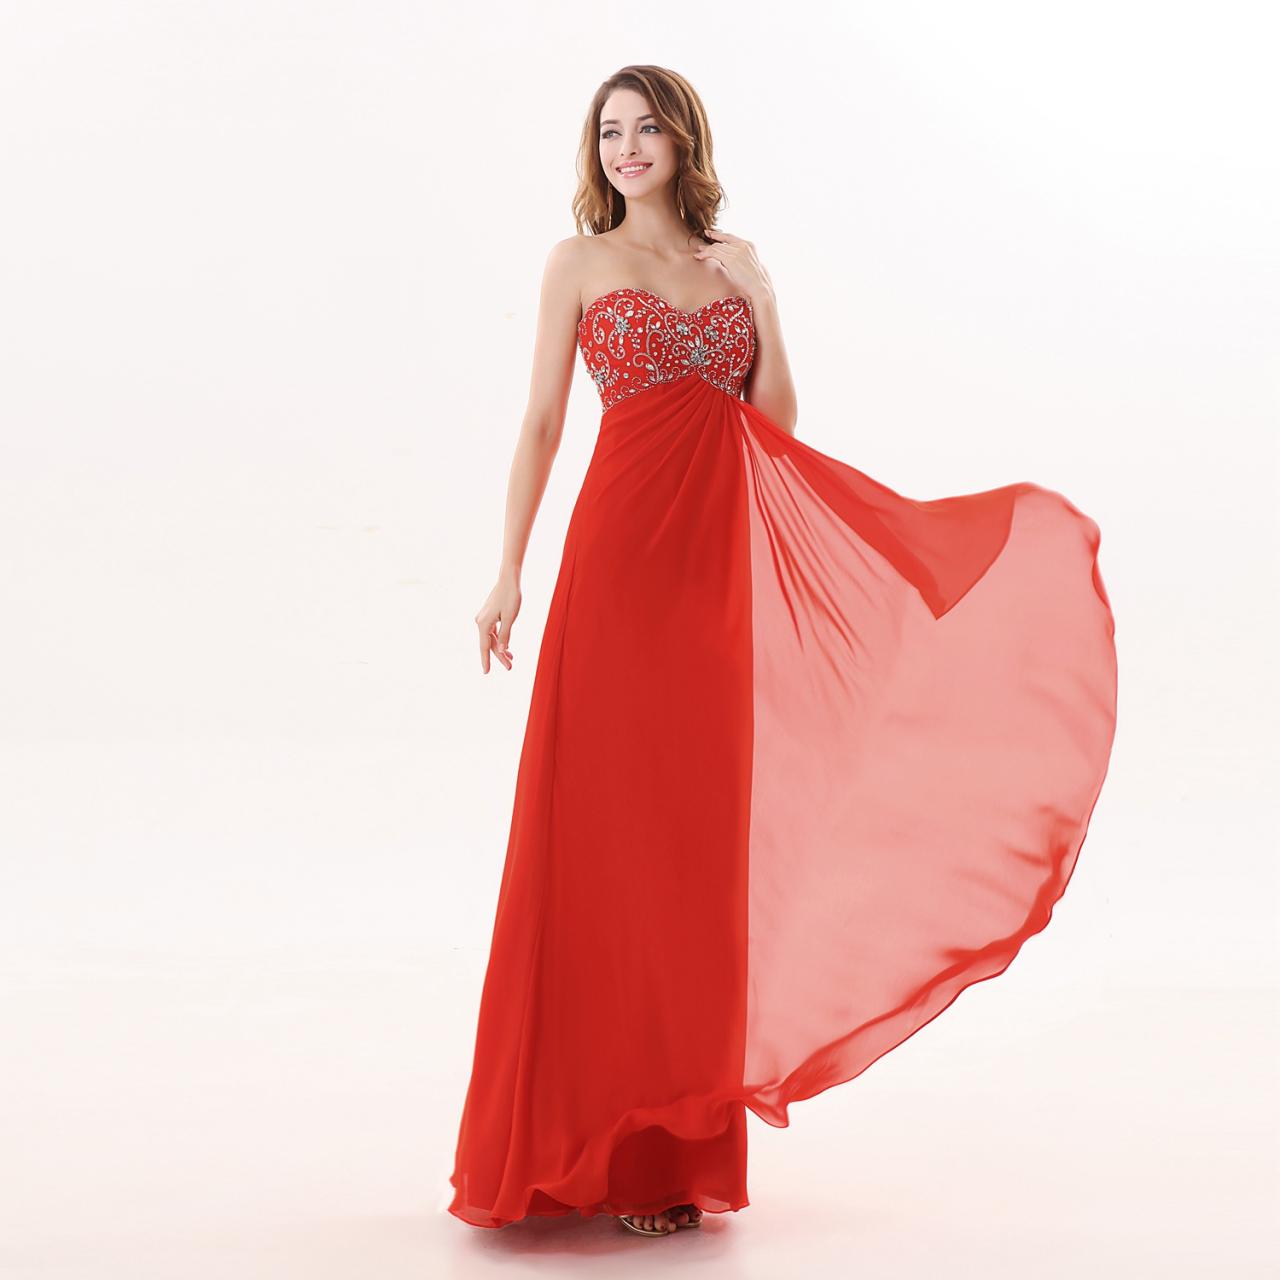 2017 Red Long Sweetheart A Line Evening Dresses Beaded Party Dress Robe De Soiree Formal Gowns